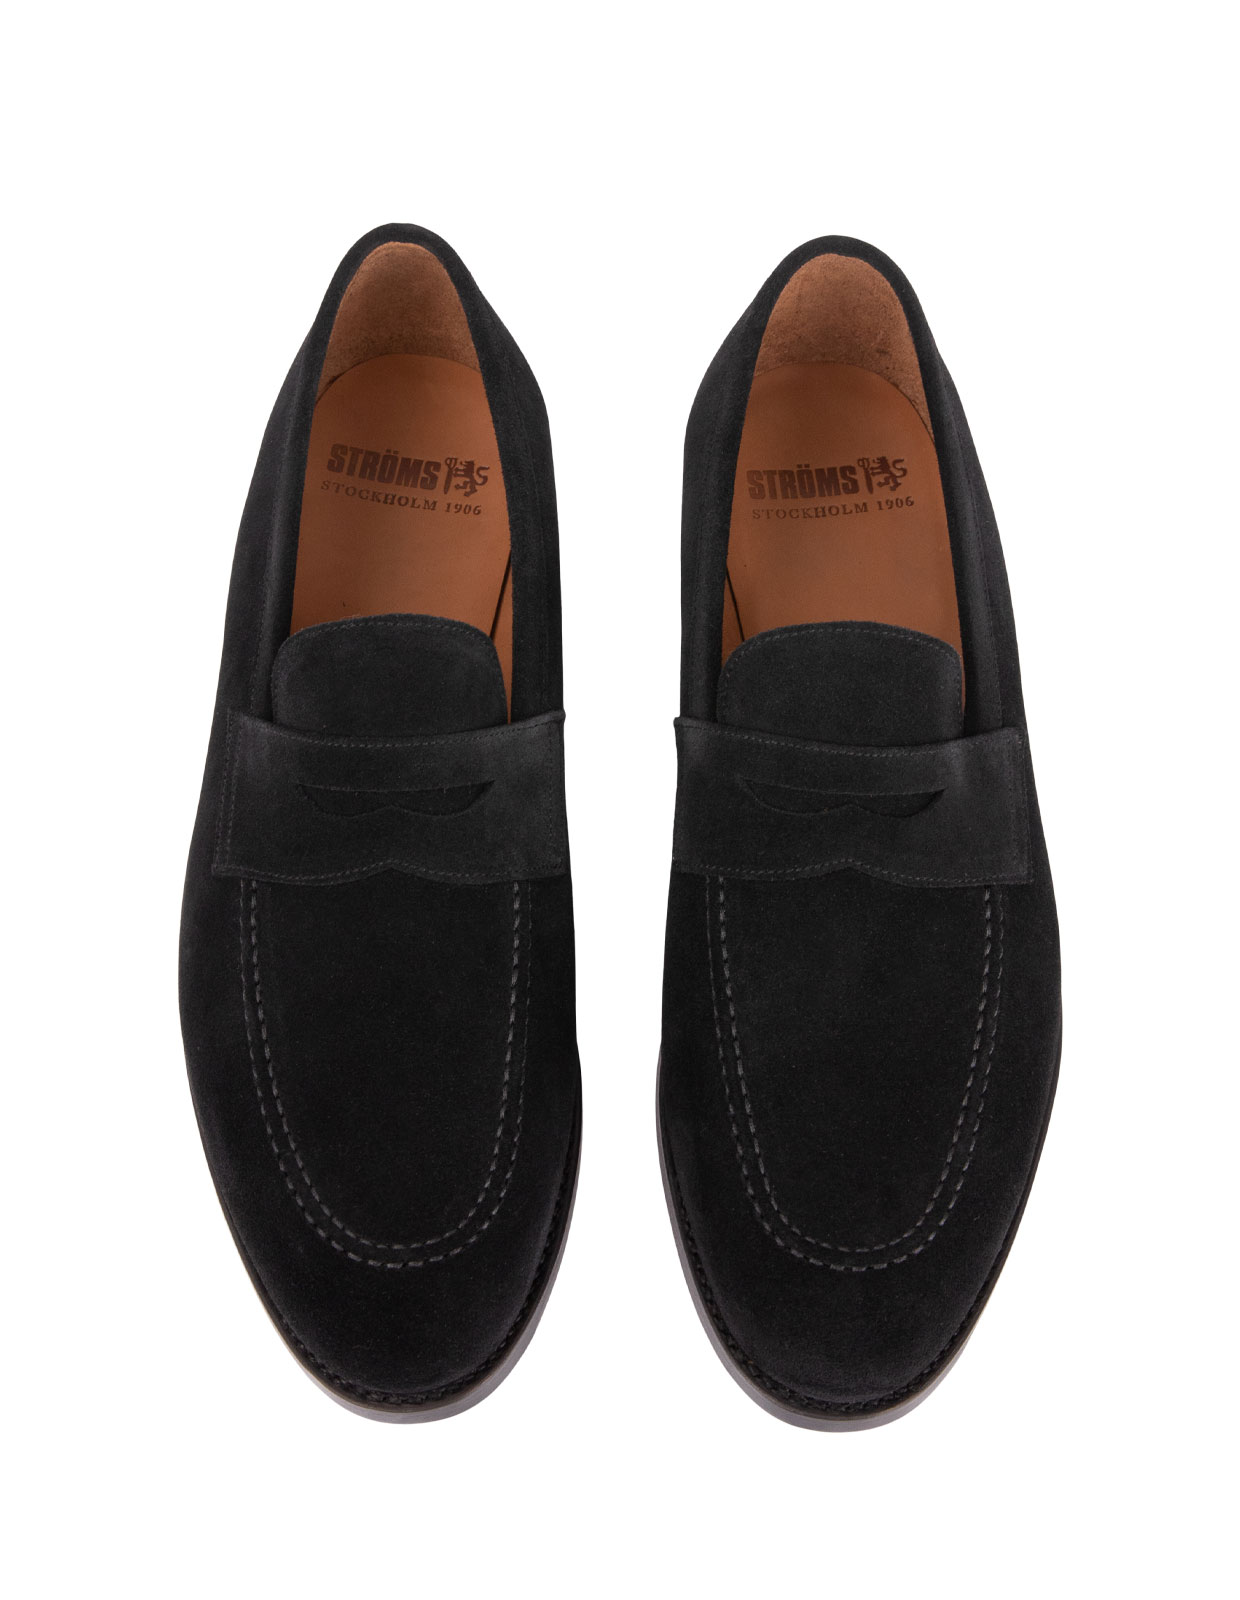 Penny Loafers Suede Black Stl 12